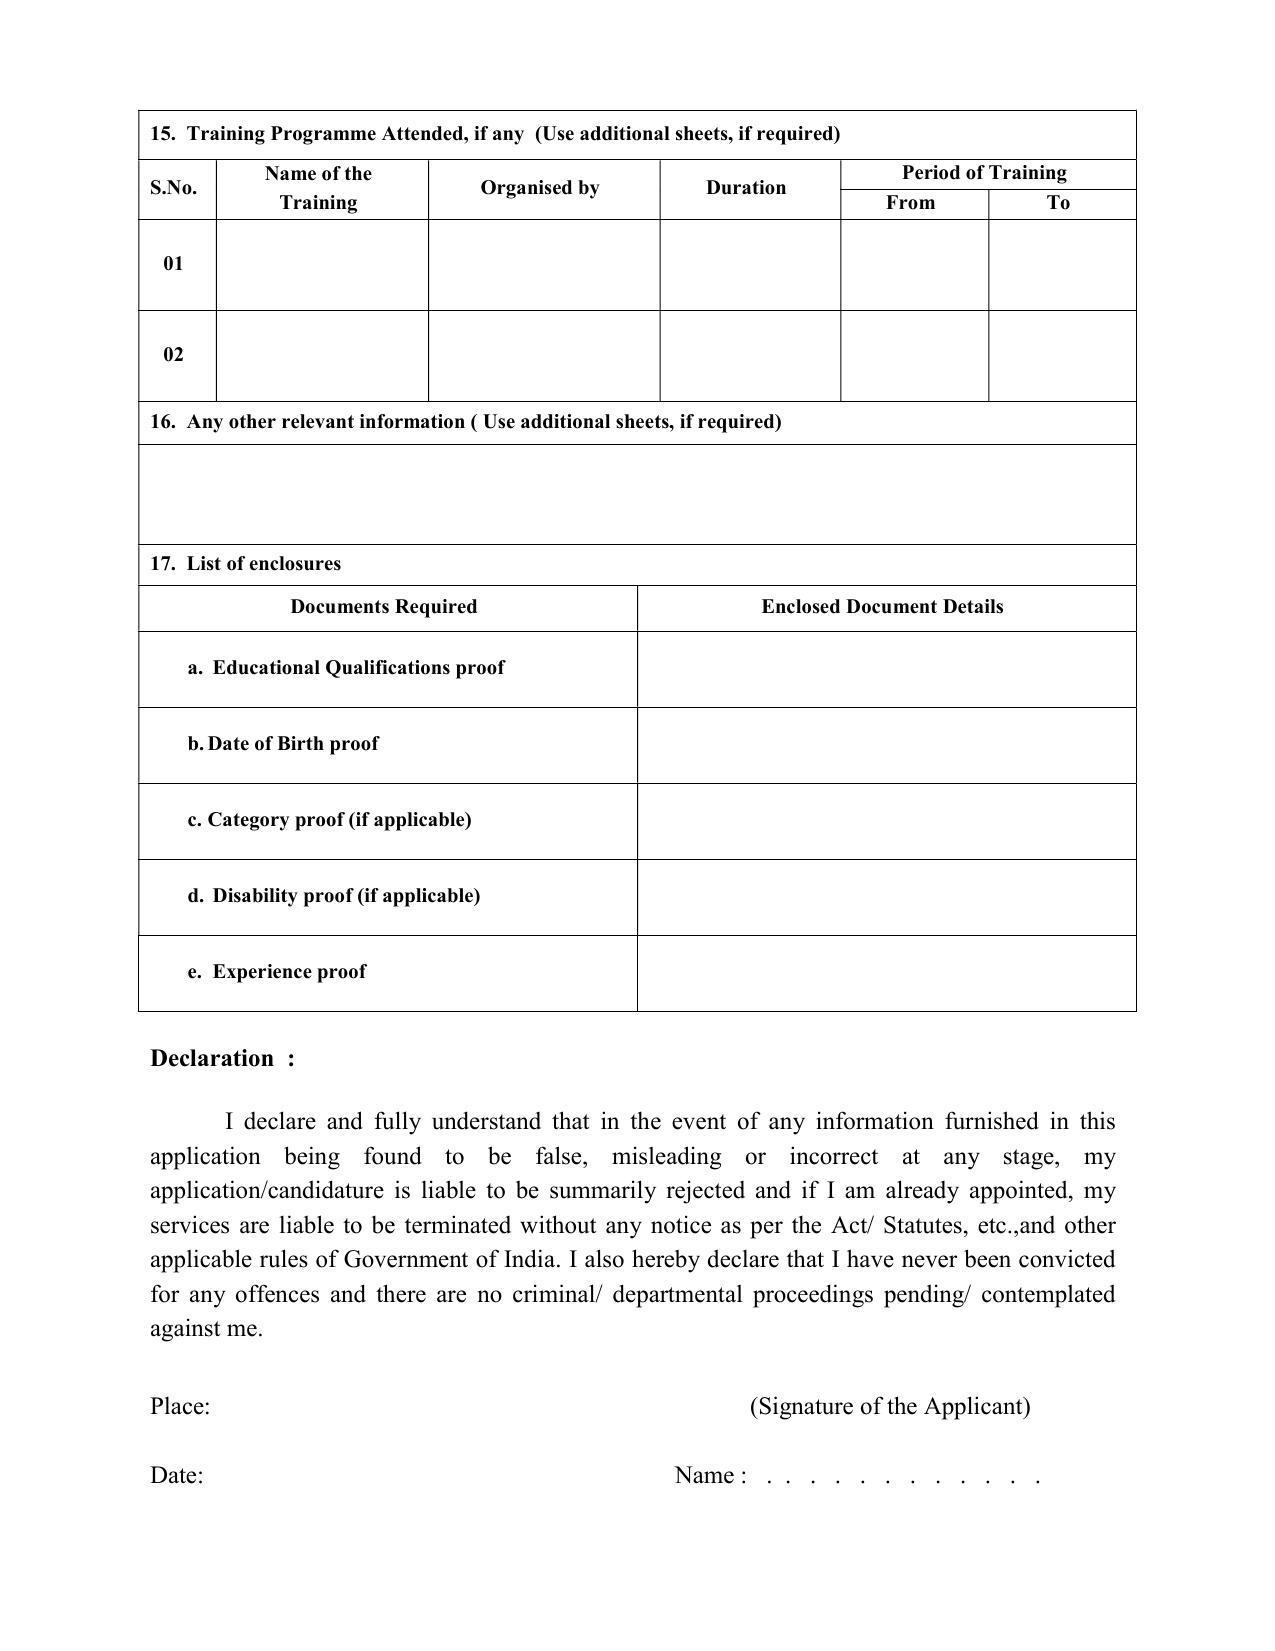 NCHMCT Invites Application for Stenographer, Director, More Vacancies Recruitment 2022 - Page 5